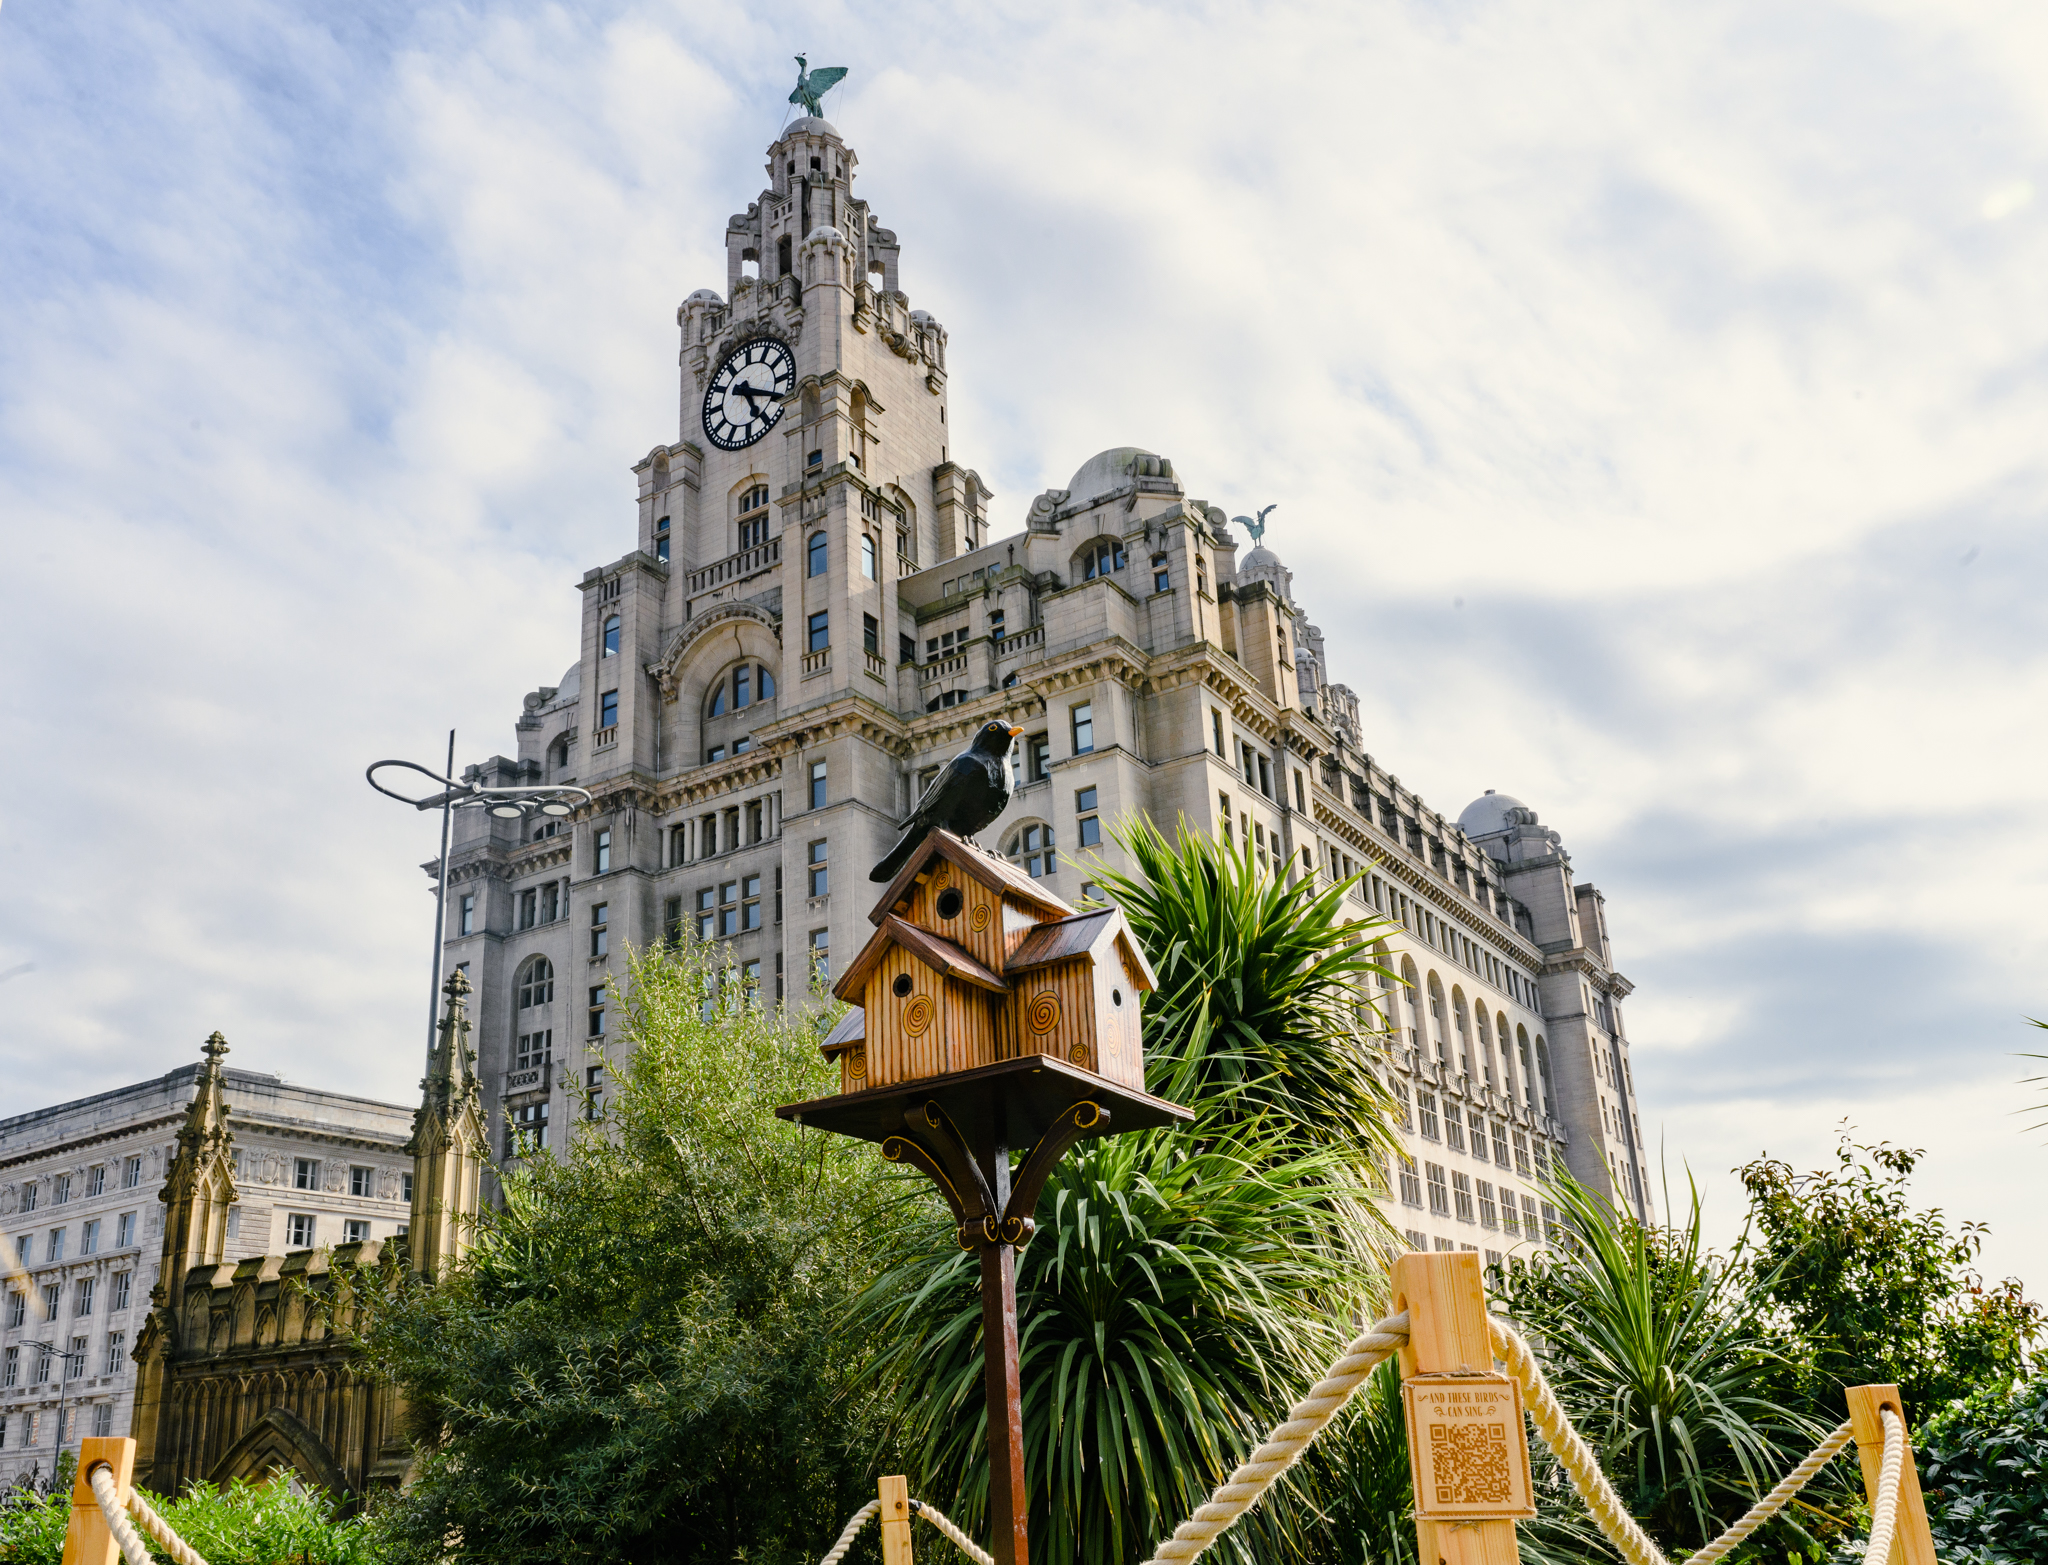 public artwork bird box with a wooden bird on top in front of the royal liver building